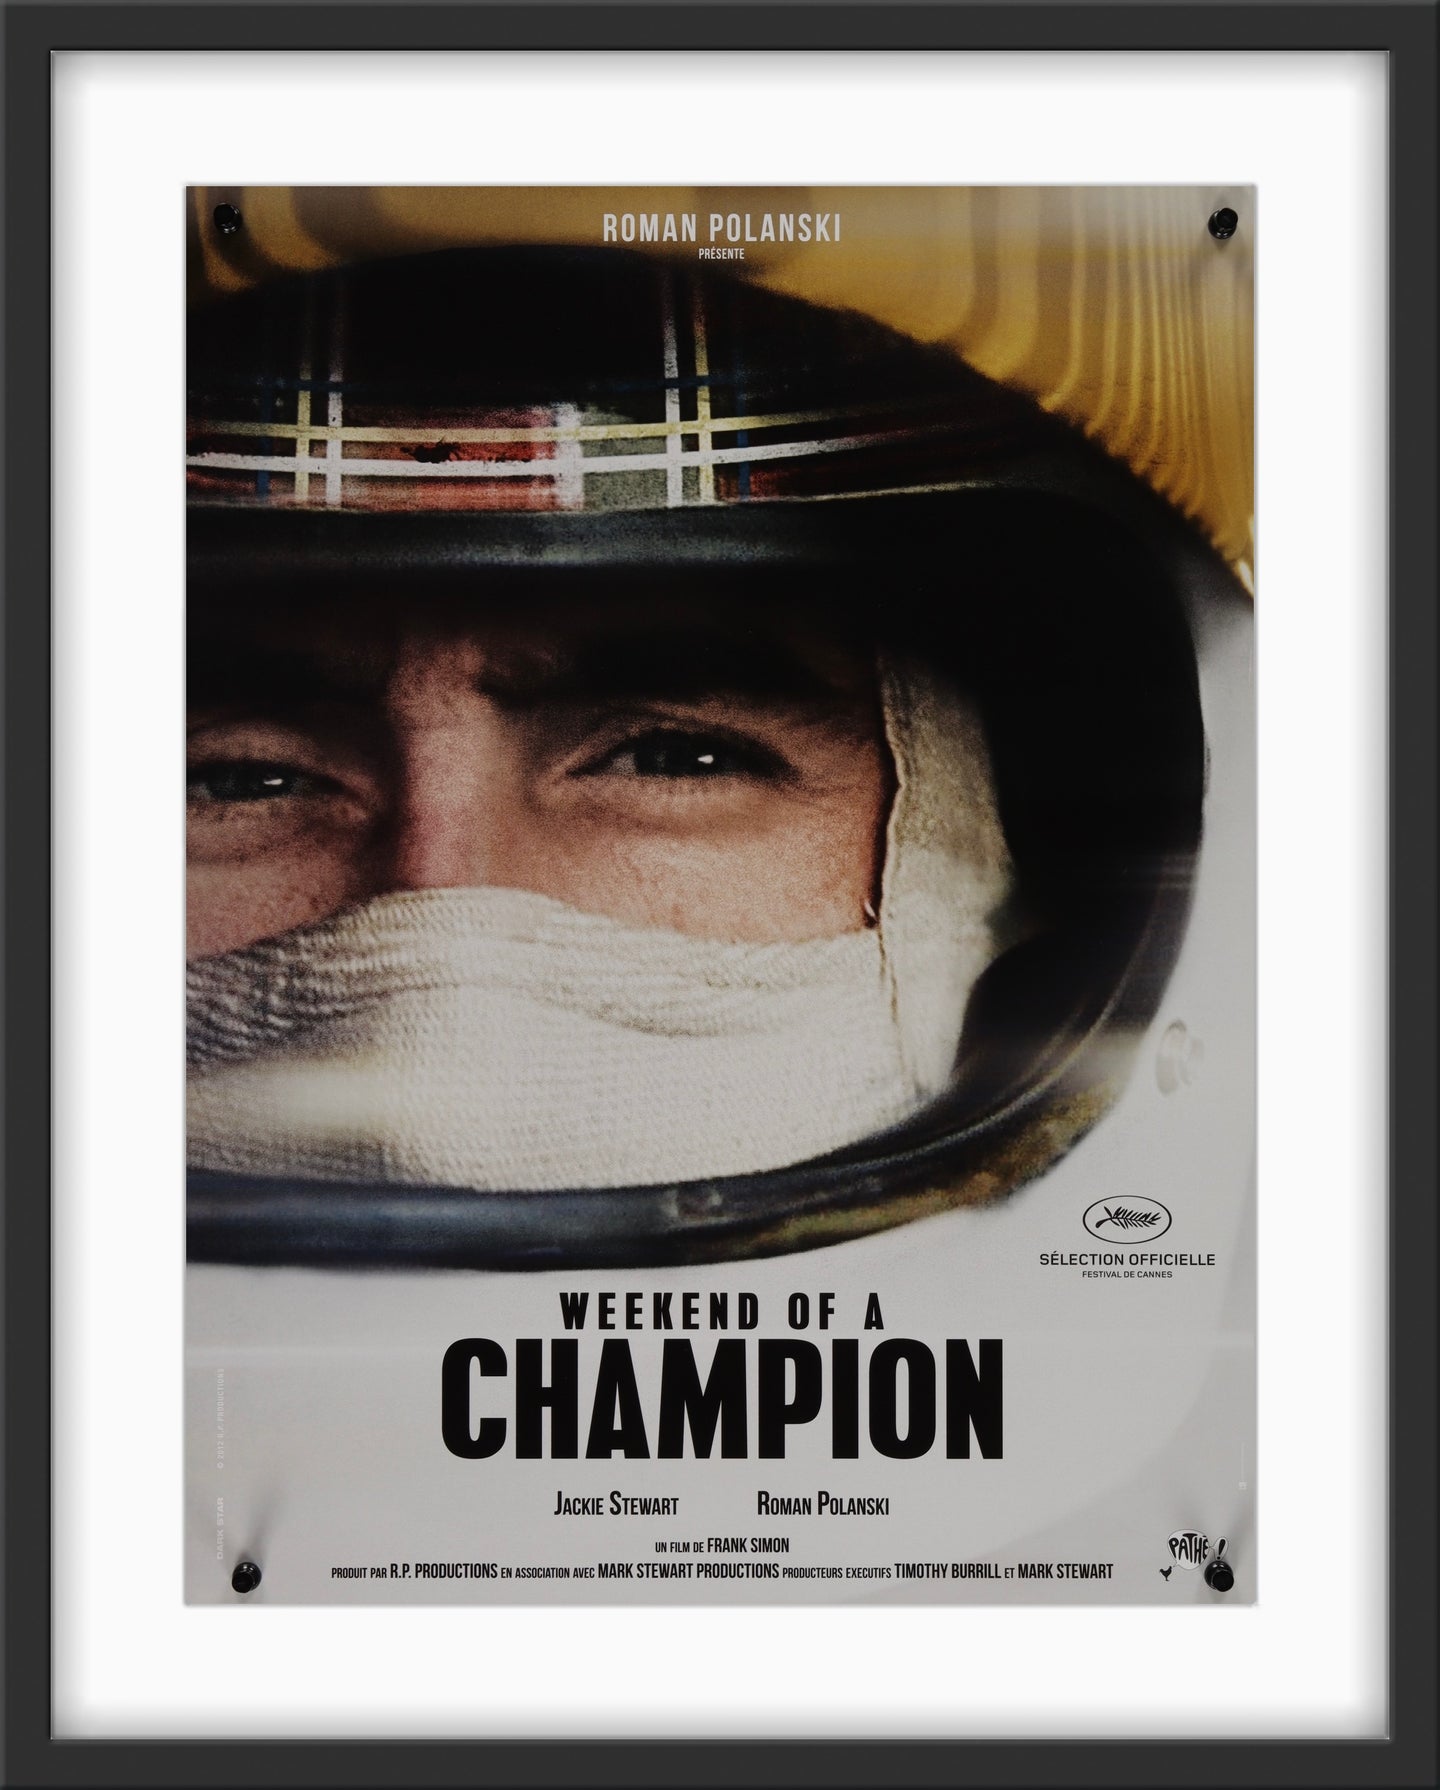 An original movie poster for the Jackie Stewart film Weekend of a Champion